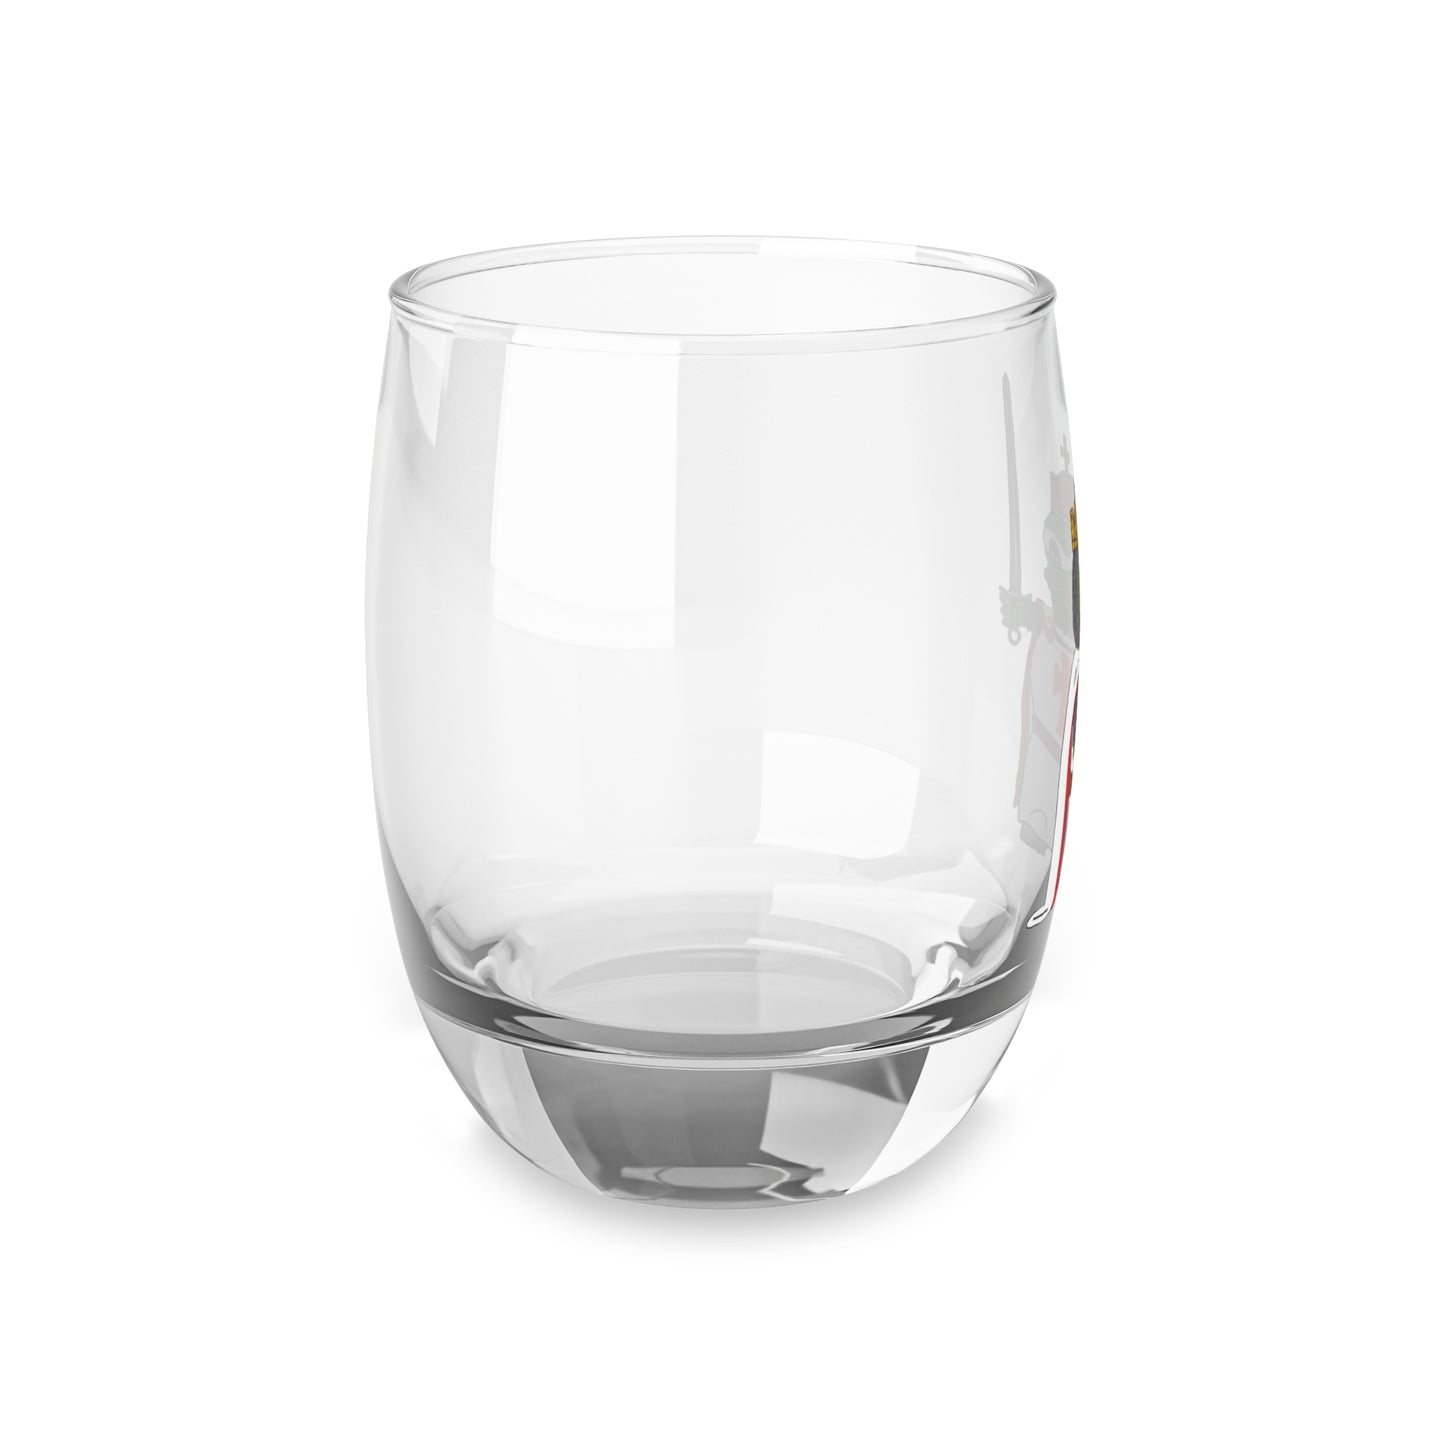 Pepe the Crusader Knight Whiskey Glass